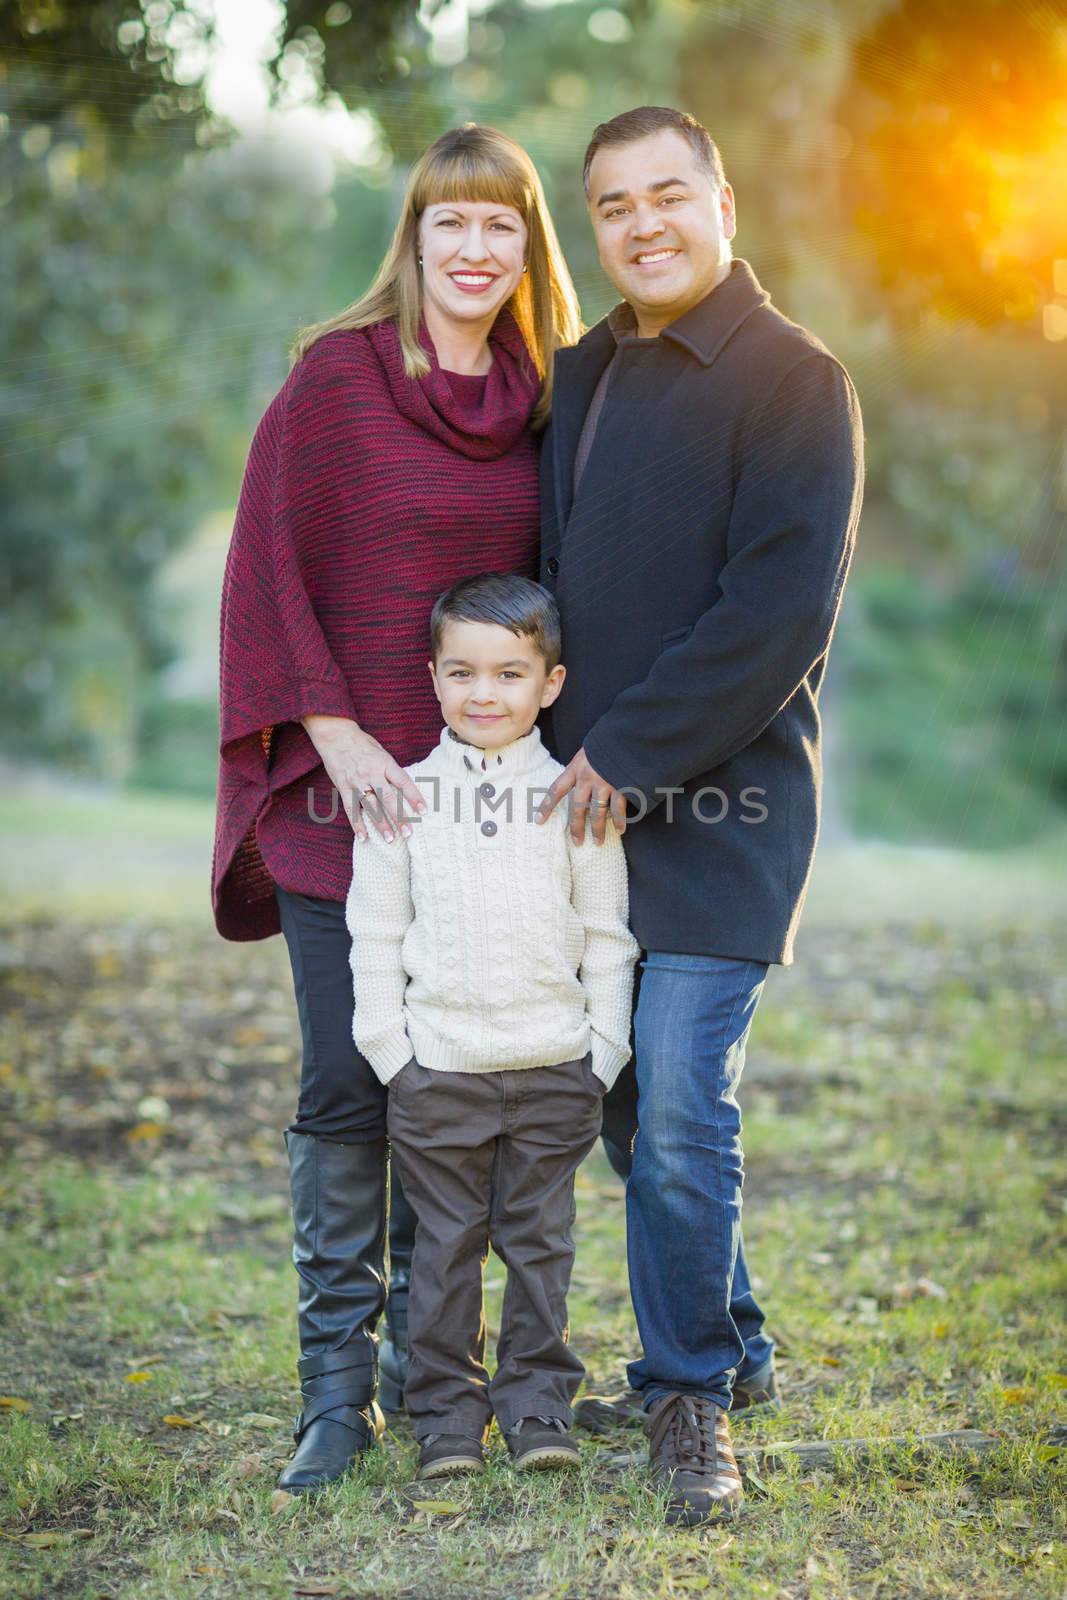 Young Mixed Race Family Portrait Outdoors by Feverpitched